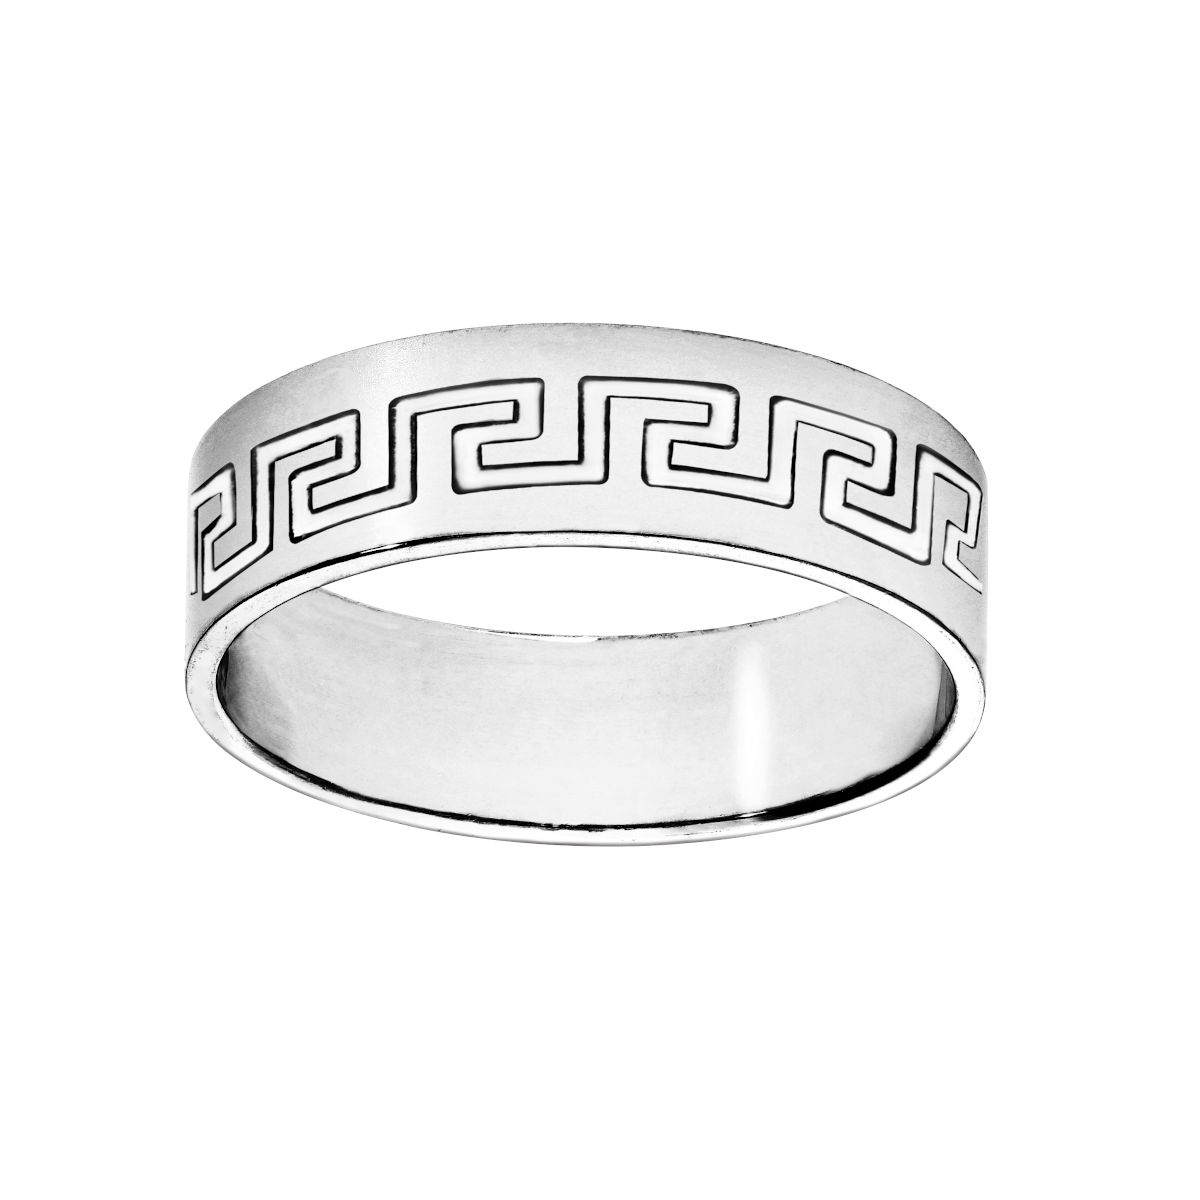 Bague ALLIANCE HOMME Maille GREC Plaqué OR NEUF T 60 